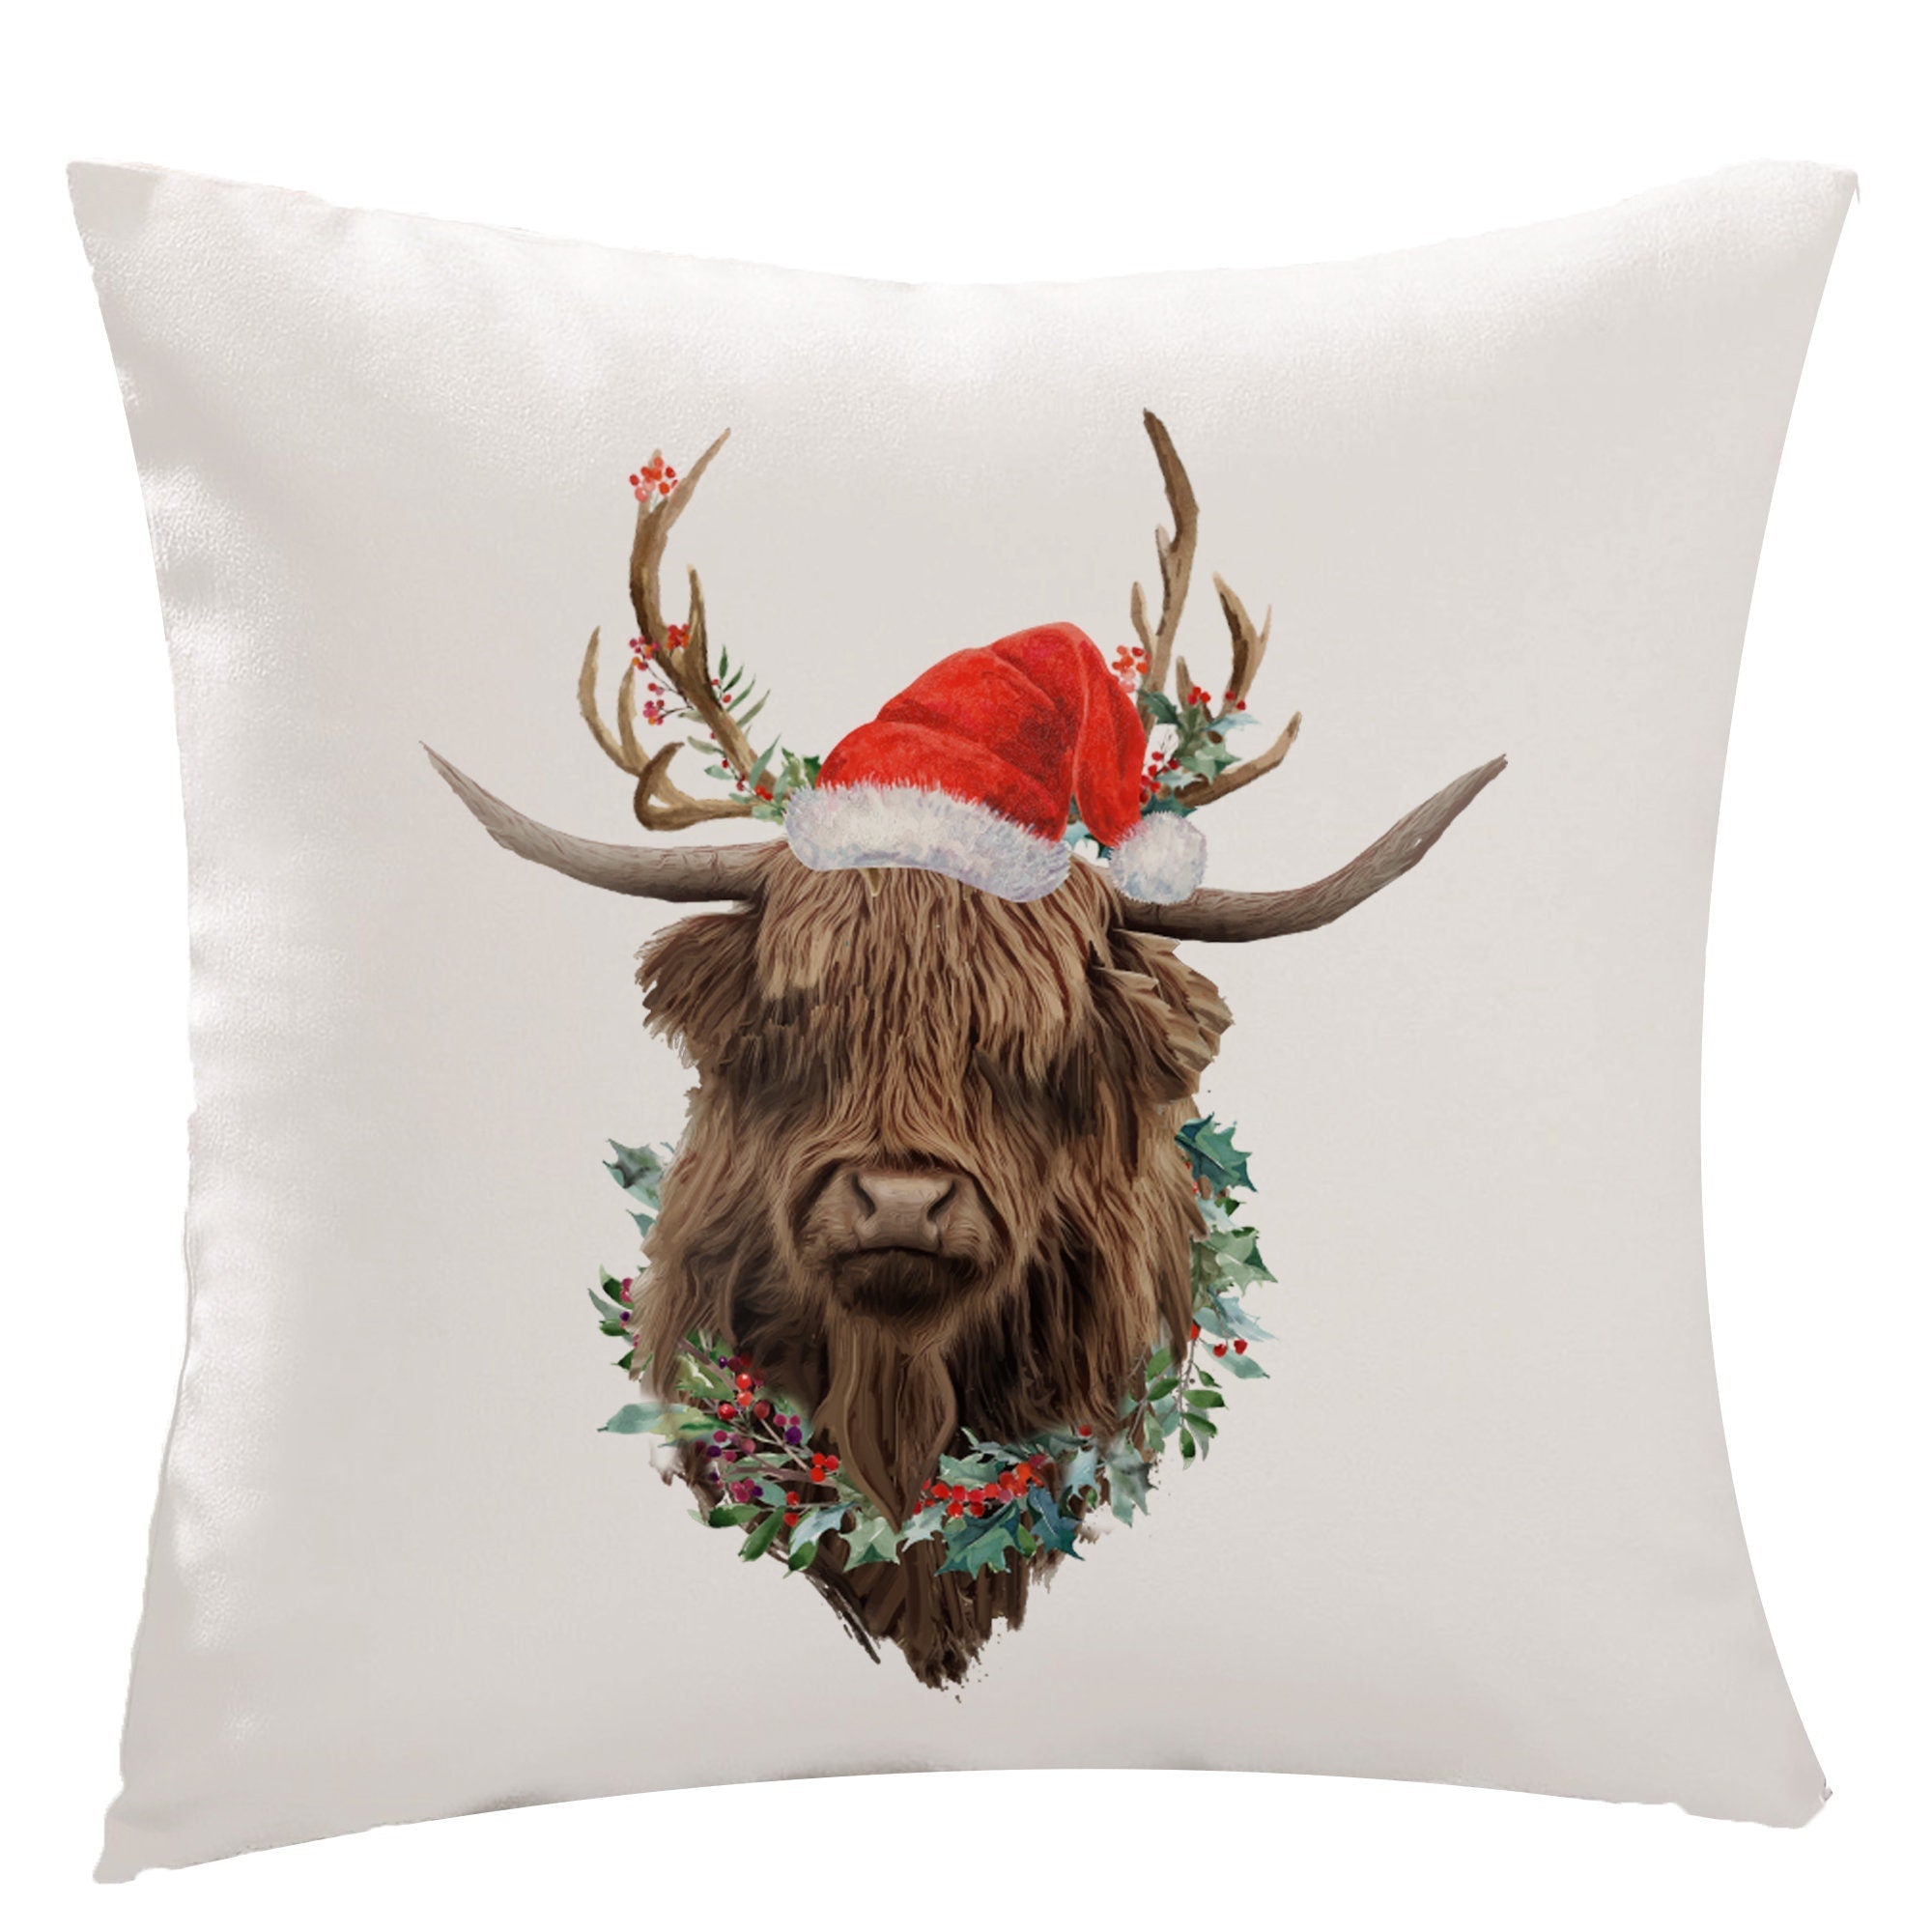 Highland Cow with Santa Hat Cushion Christmas Home Decoration Xmas gift for nature lover